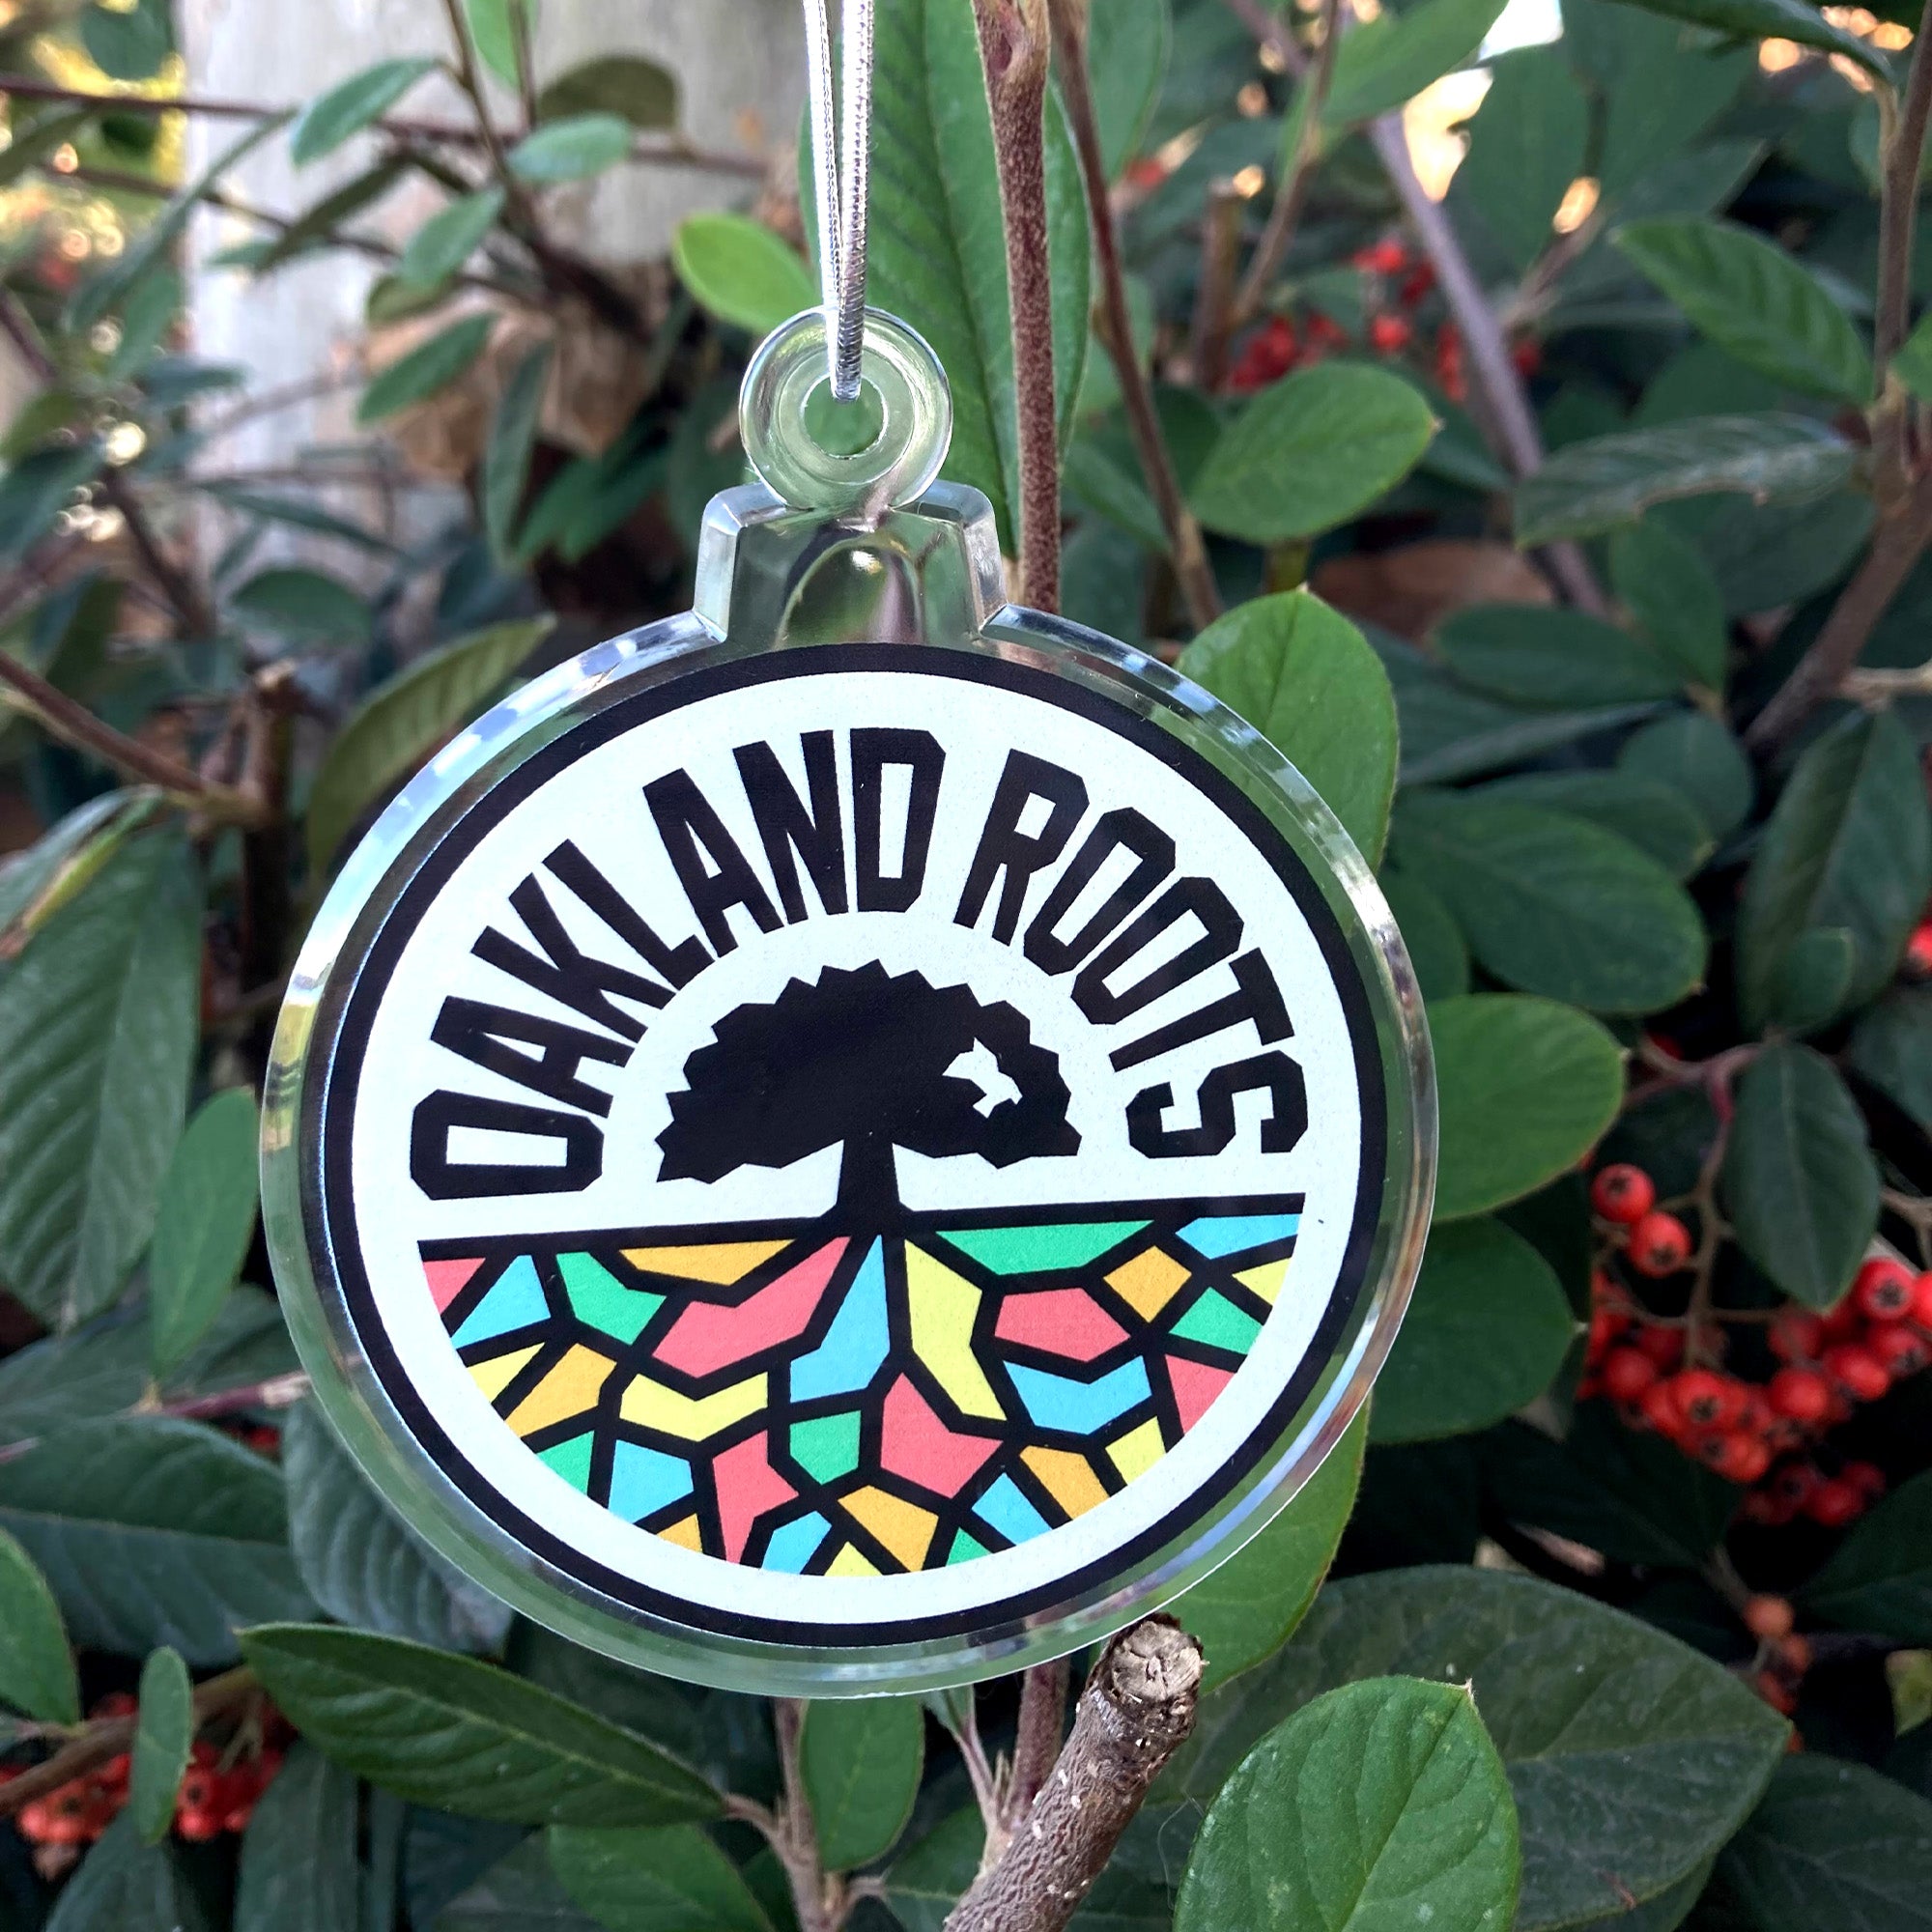 Acrylic Oakland Roots SC logo crest on a holiday ornament with silver string hanging on a holly bush.